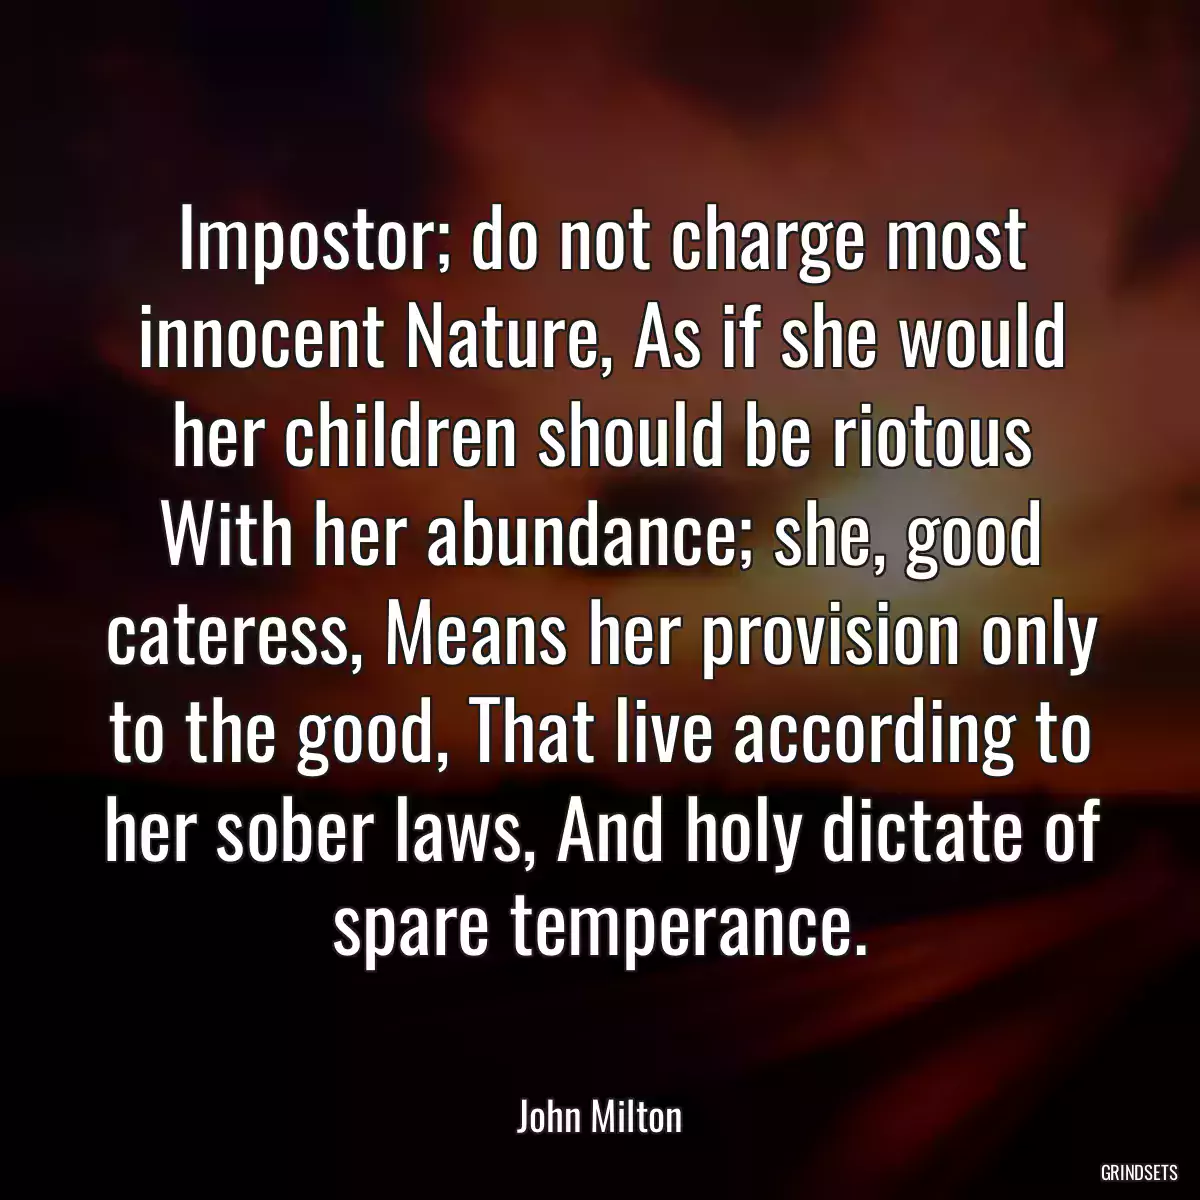 Impostor; do not charge most innocent Nature, As if she would her children should be riotous With her abundance; she, good cateress, Means her provision only to the good, That live according to her sober laws, And holy dictate of spare temperance.